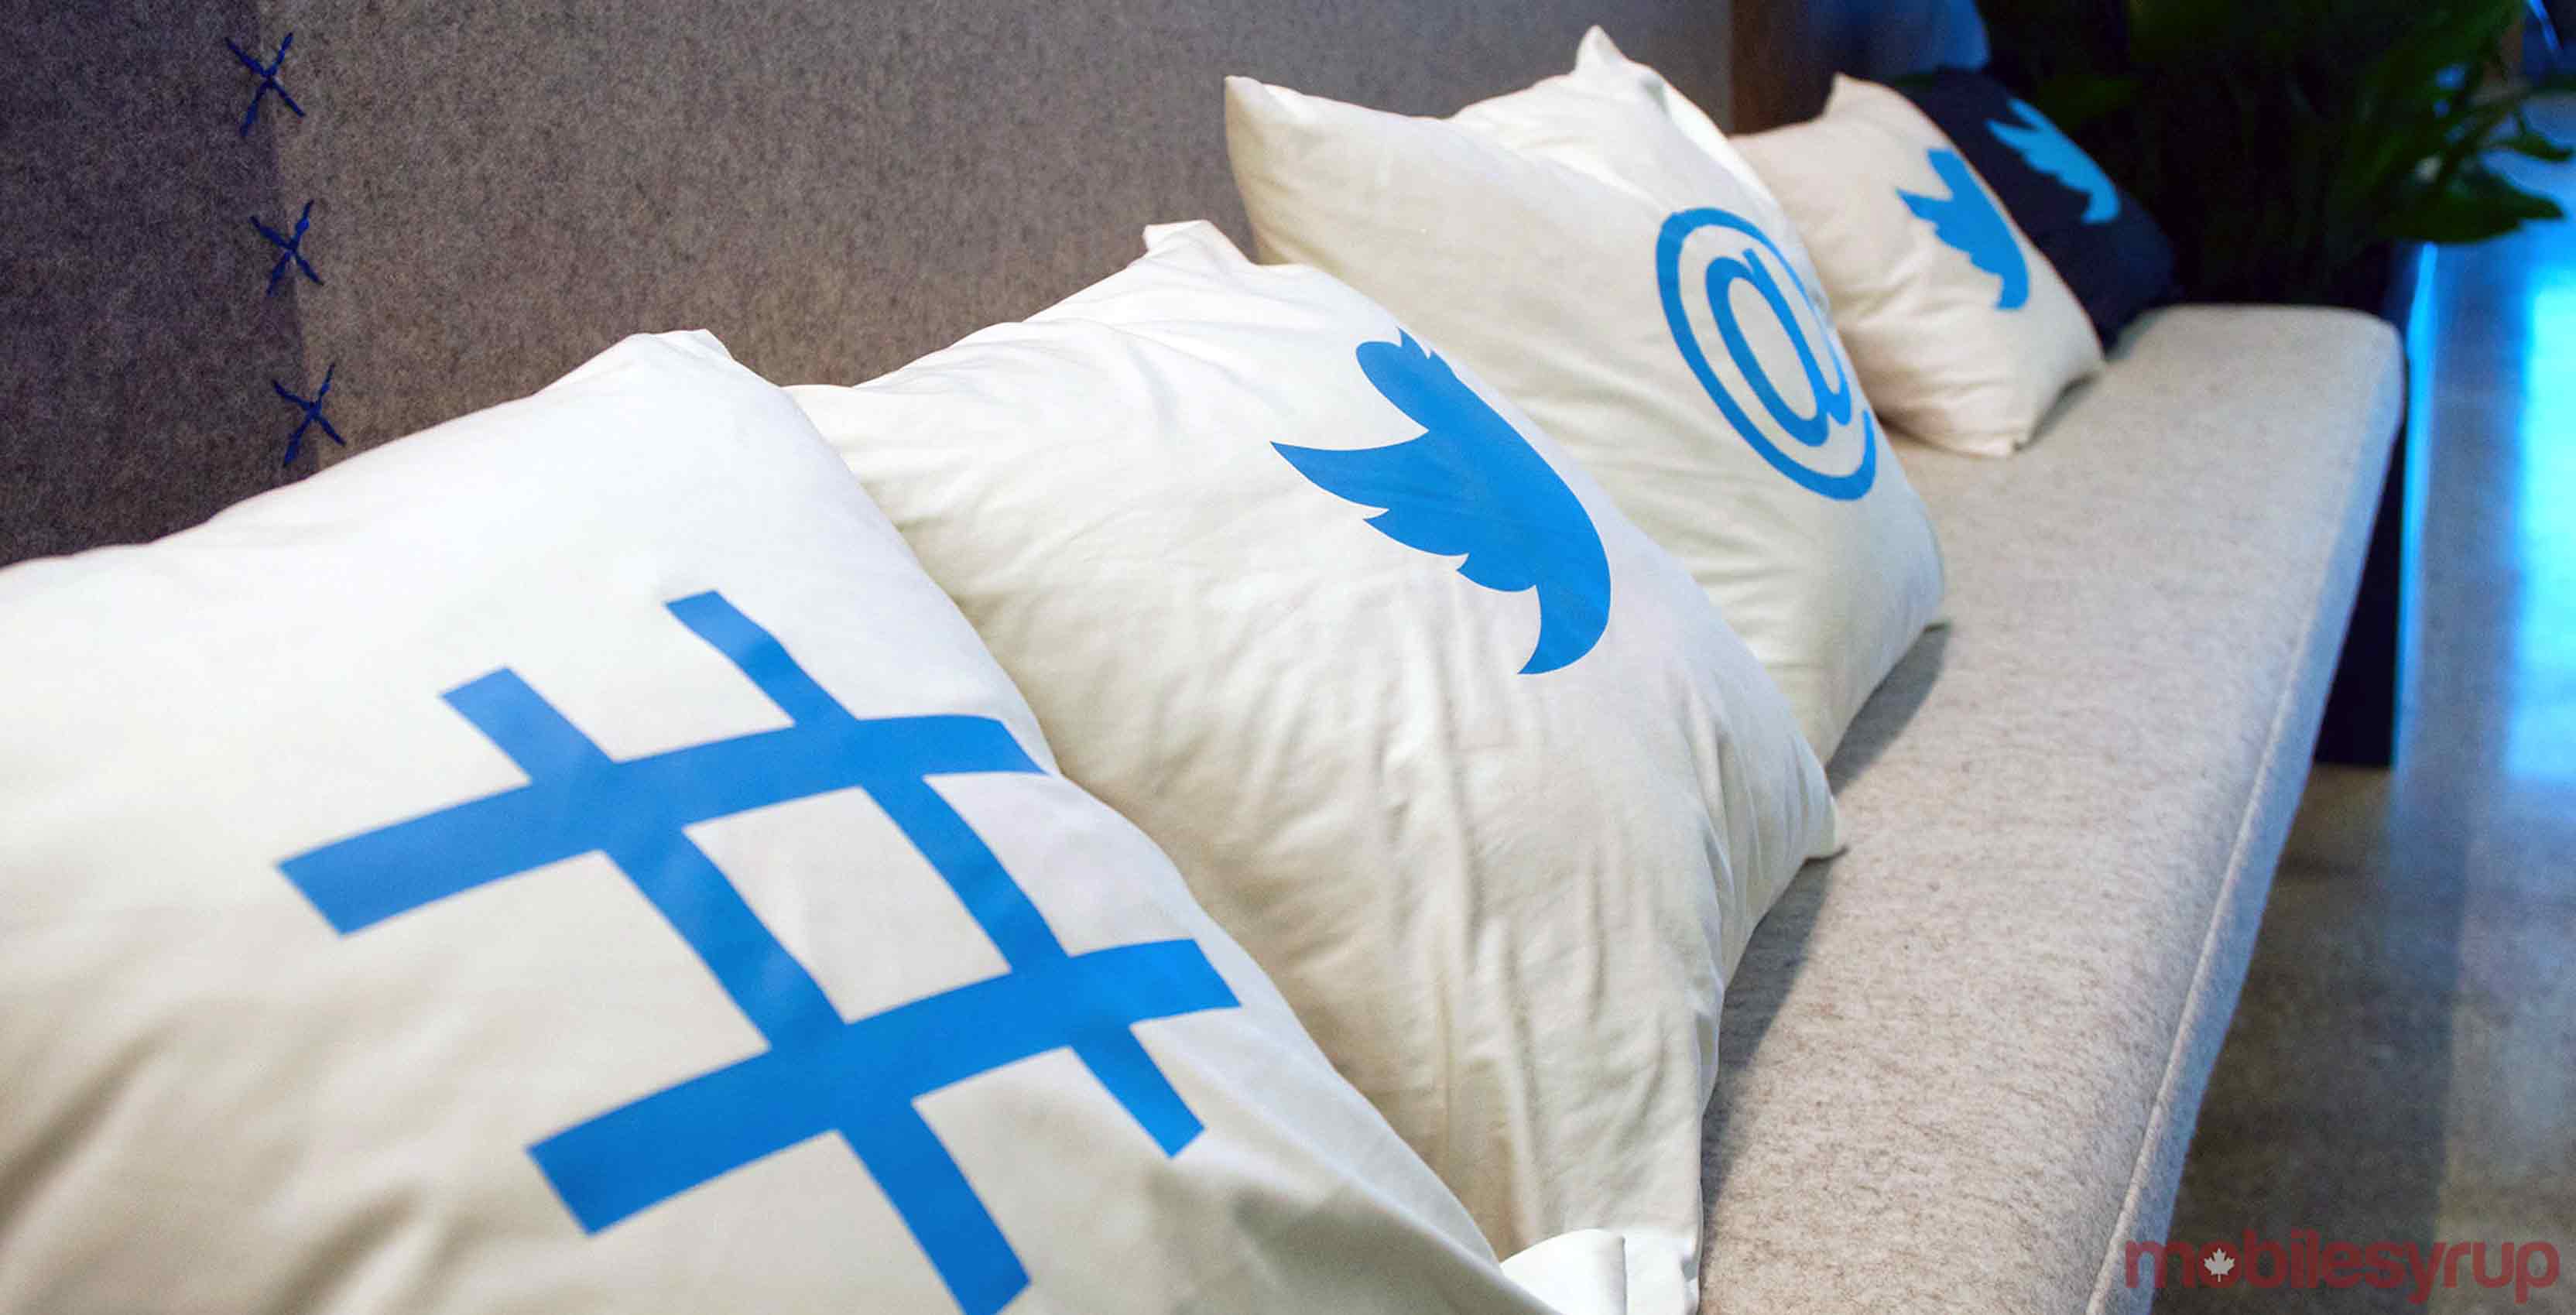 Twitter Pillows on couch